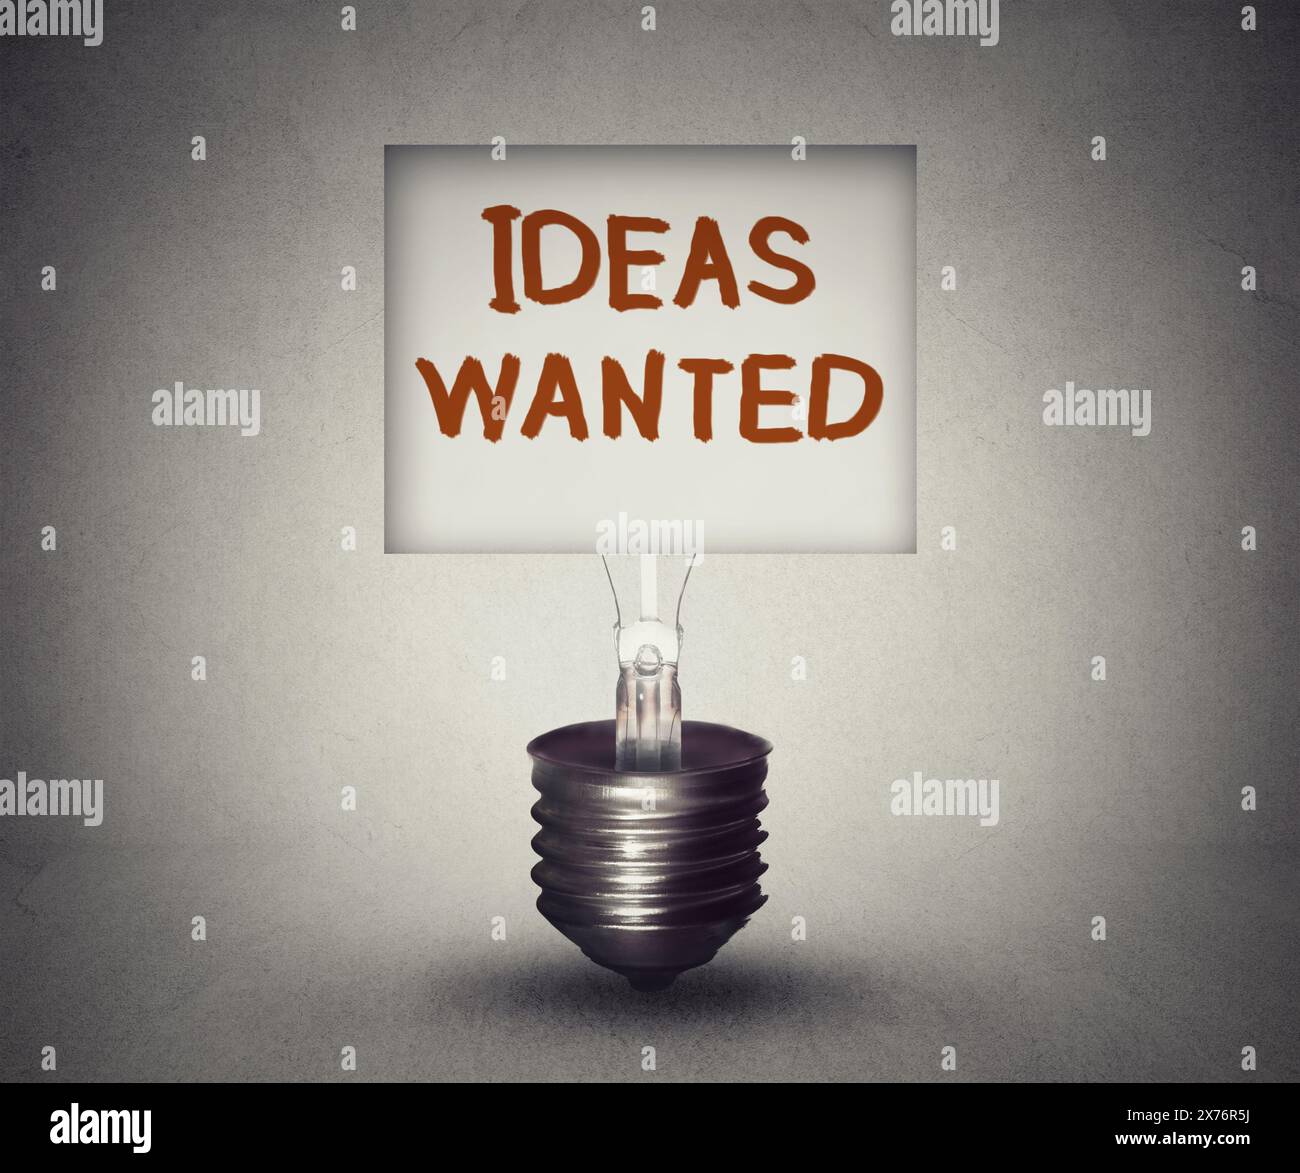 light bulb with ideas wanted message Stock Photo